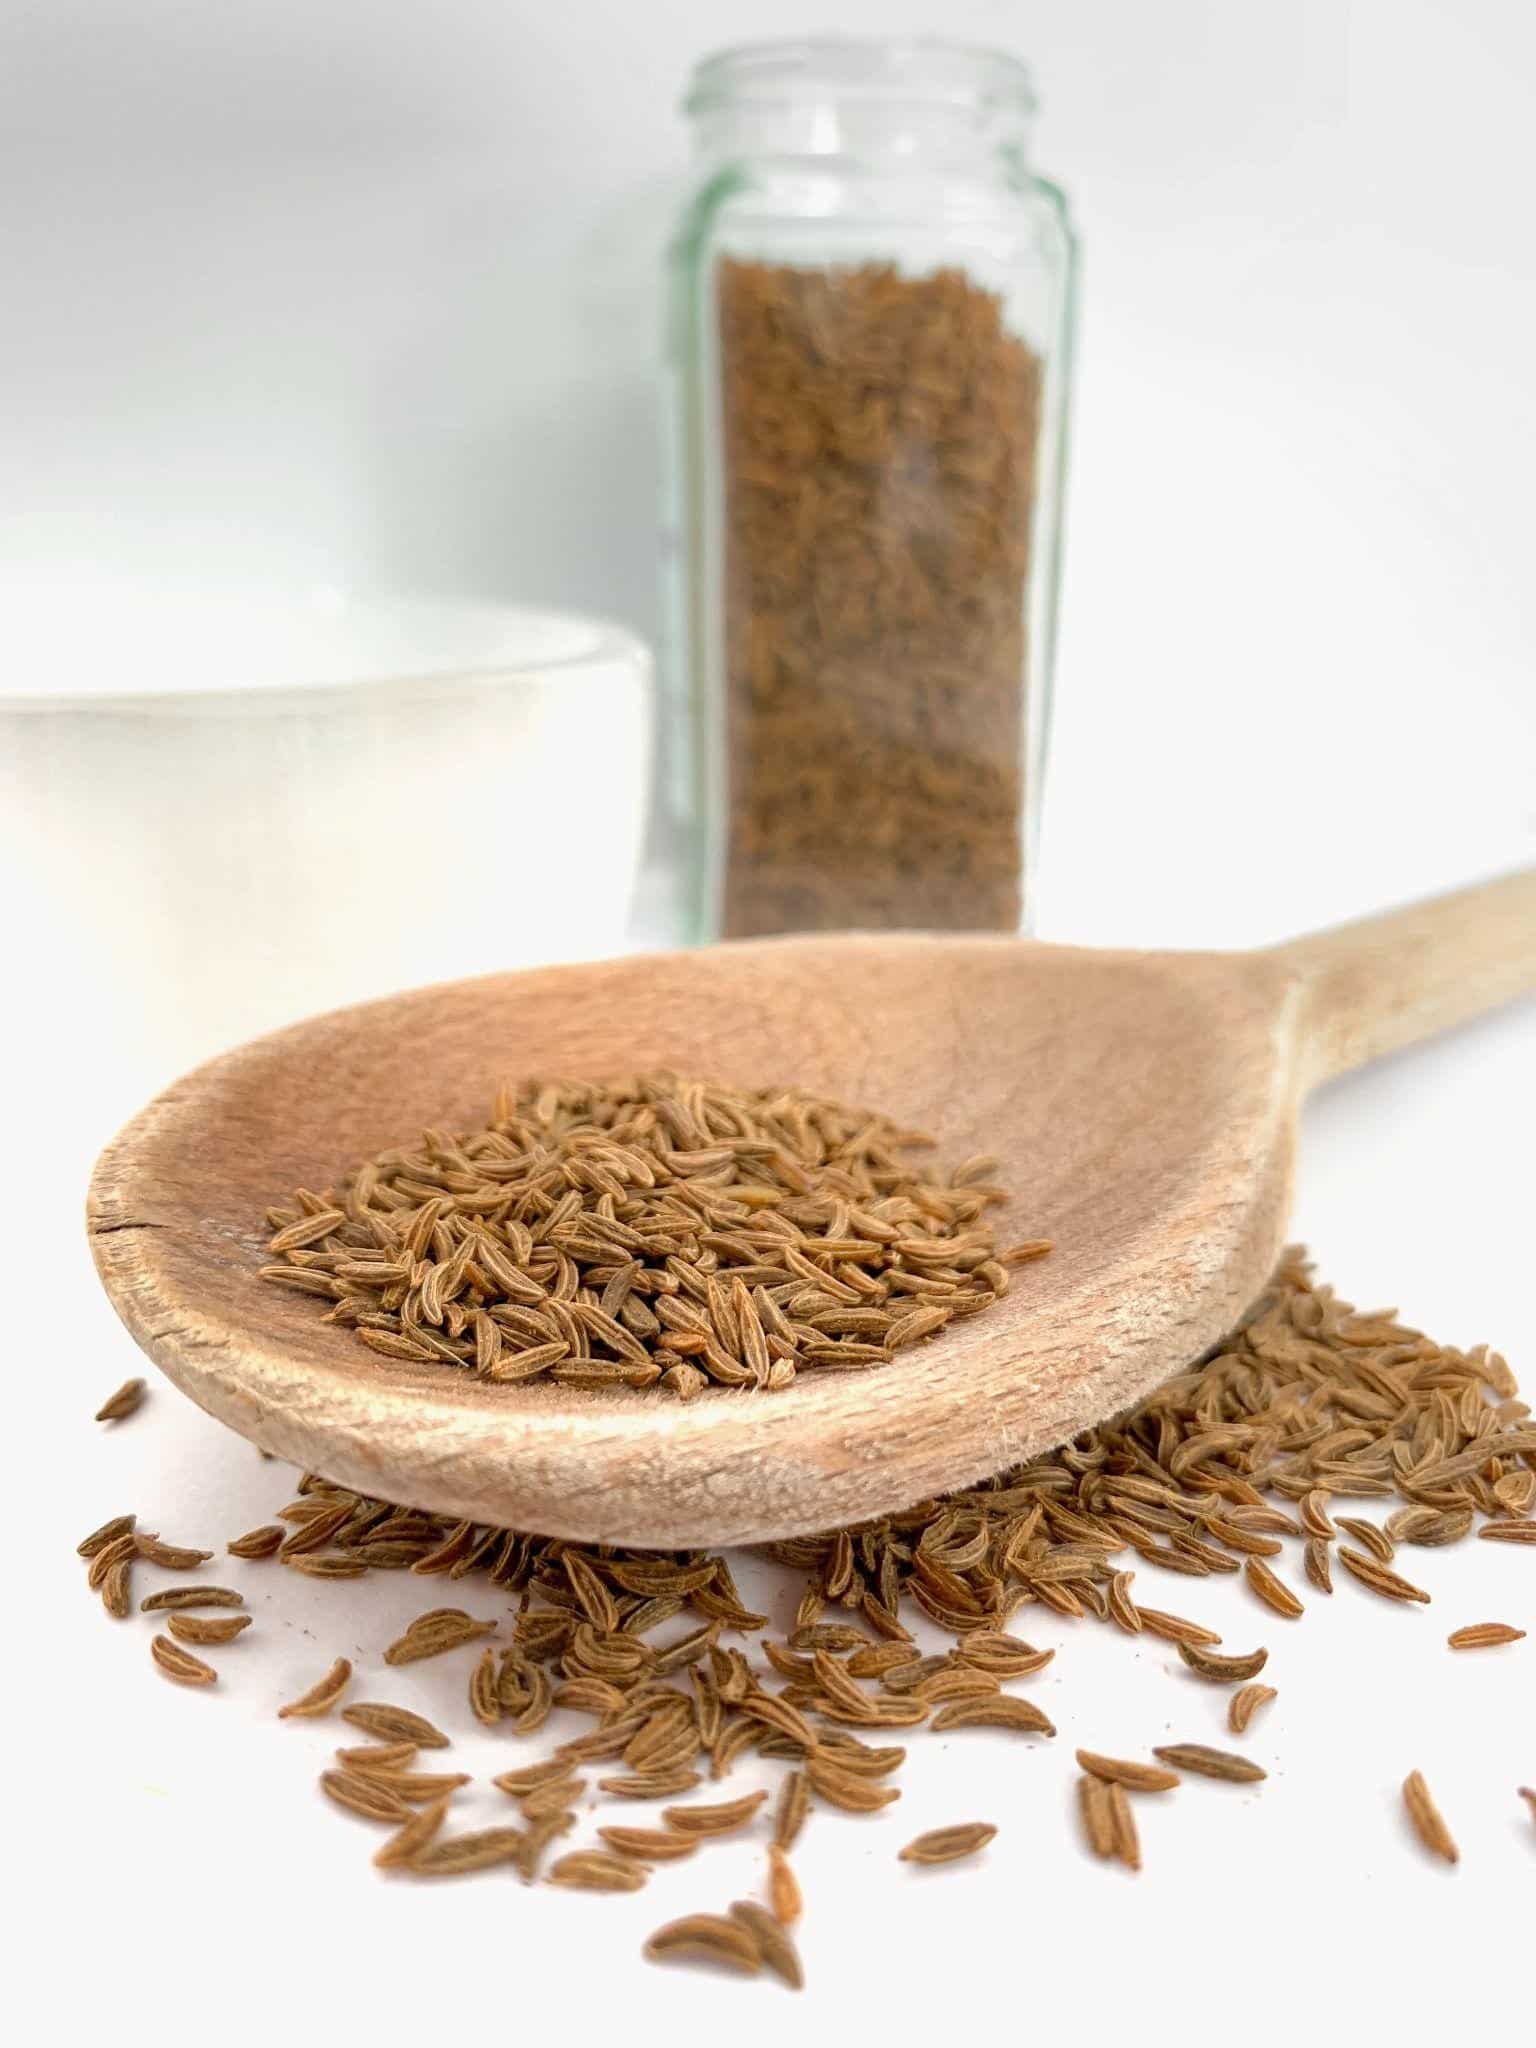 seed | 2 2 India Ayurveda Online India Ayurveda Online How To Get Rid Of Intestinal Gas Naturally How To Get Rid Of Intestinal Gas Naturally,Home Remedies For Gas Issues